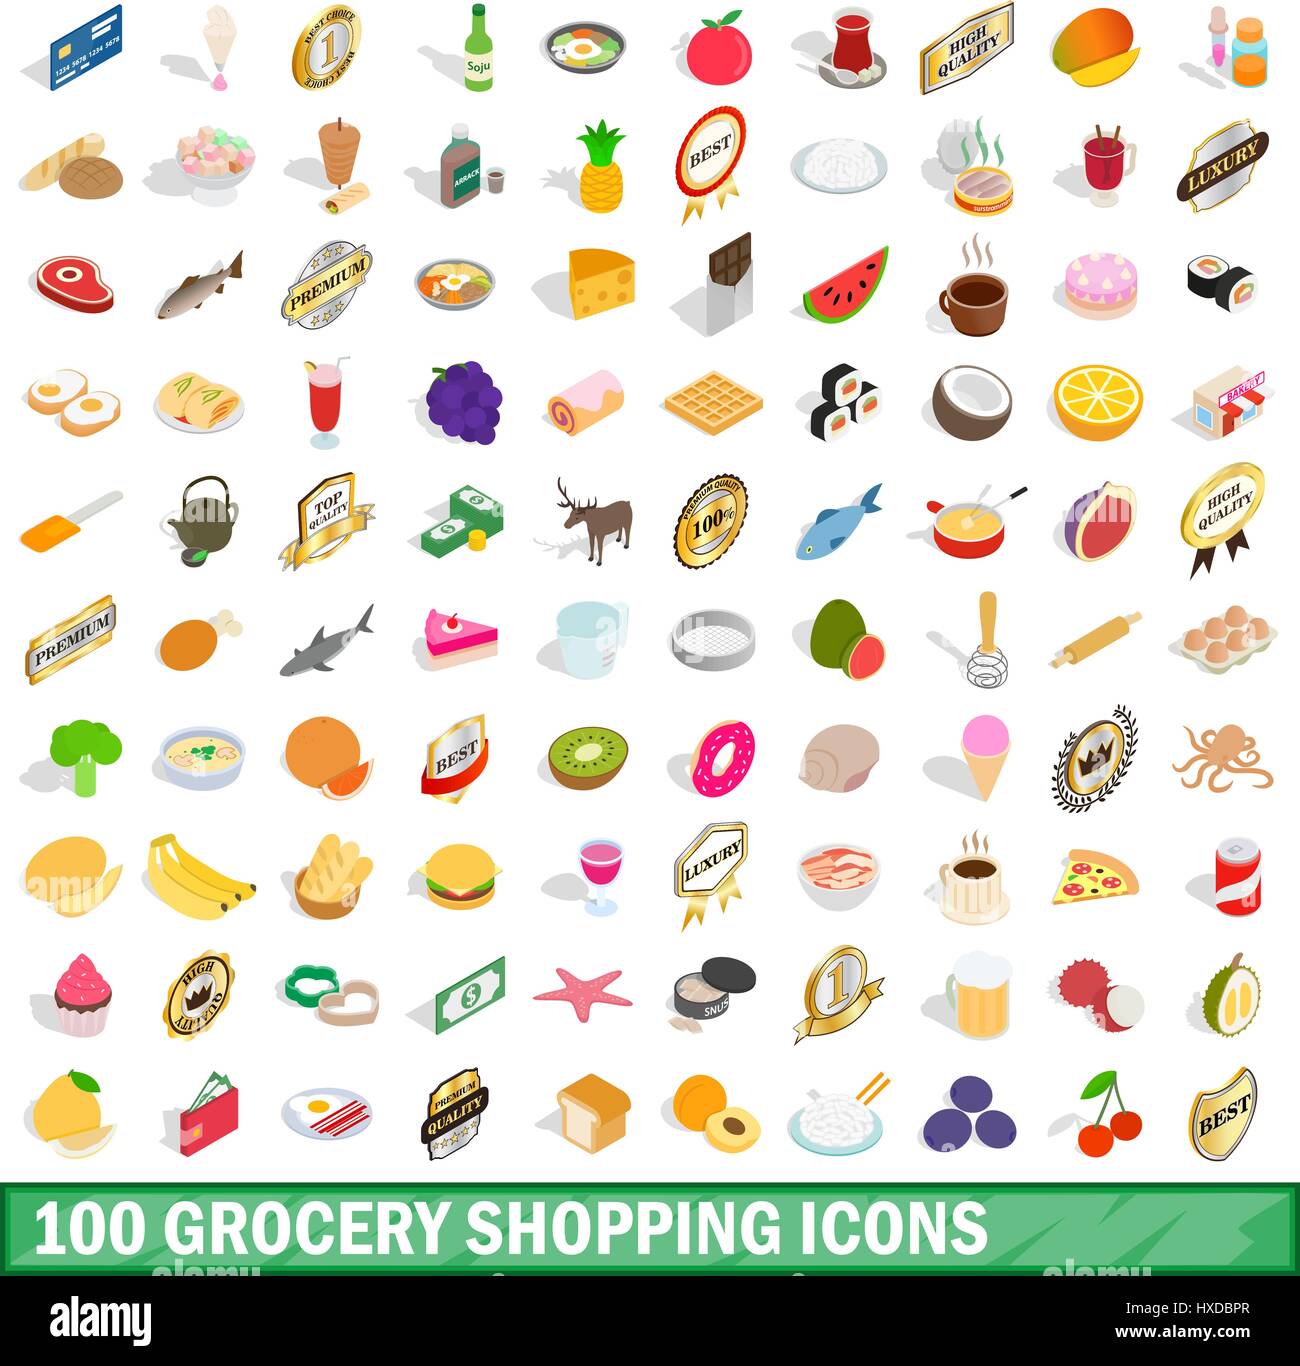 100 grocery shopping icons set, isometric 3d style Stock Vector